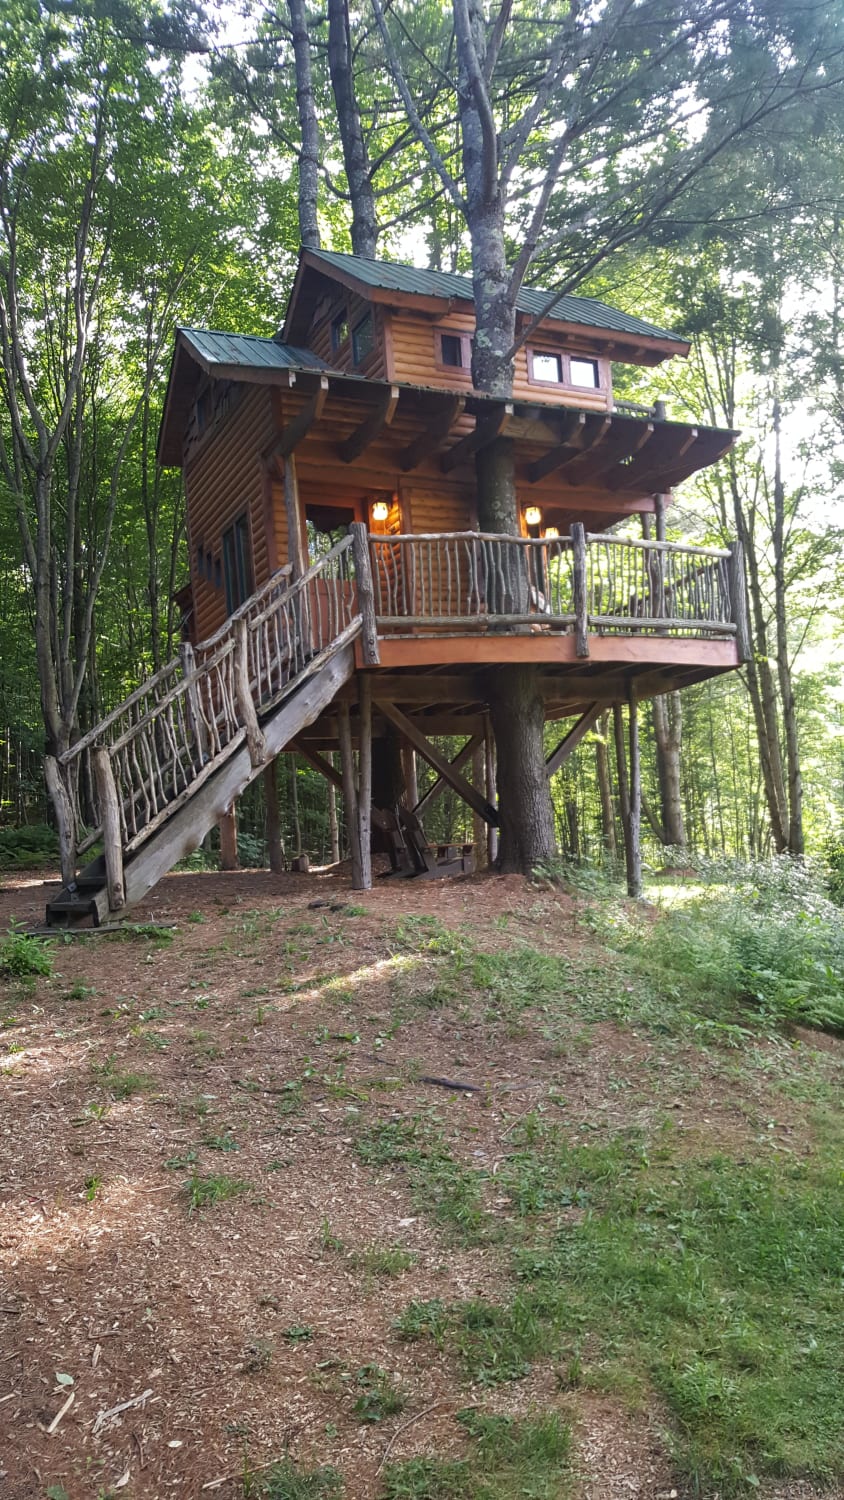 My girlfriend and I stayed in a treehouse in Vermont last week that was pretty dope.